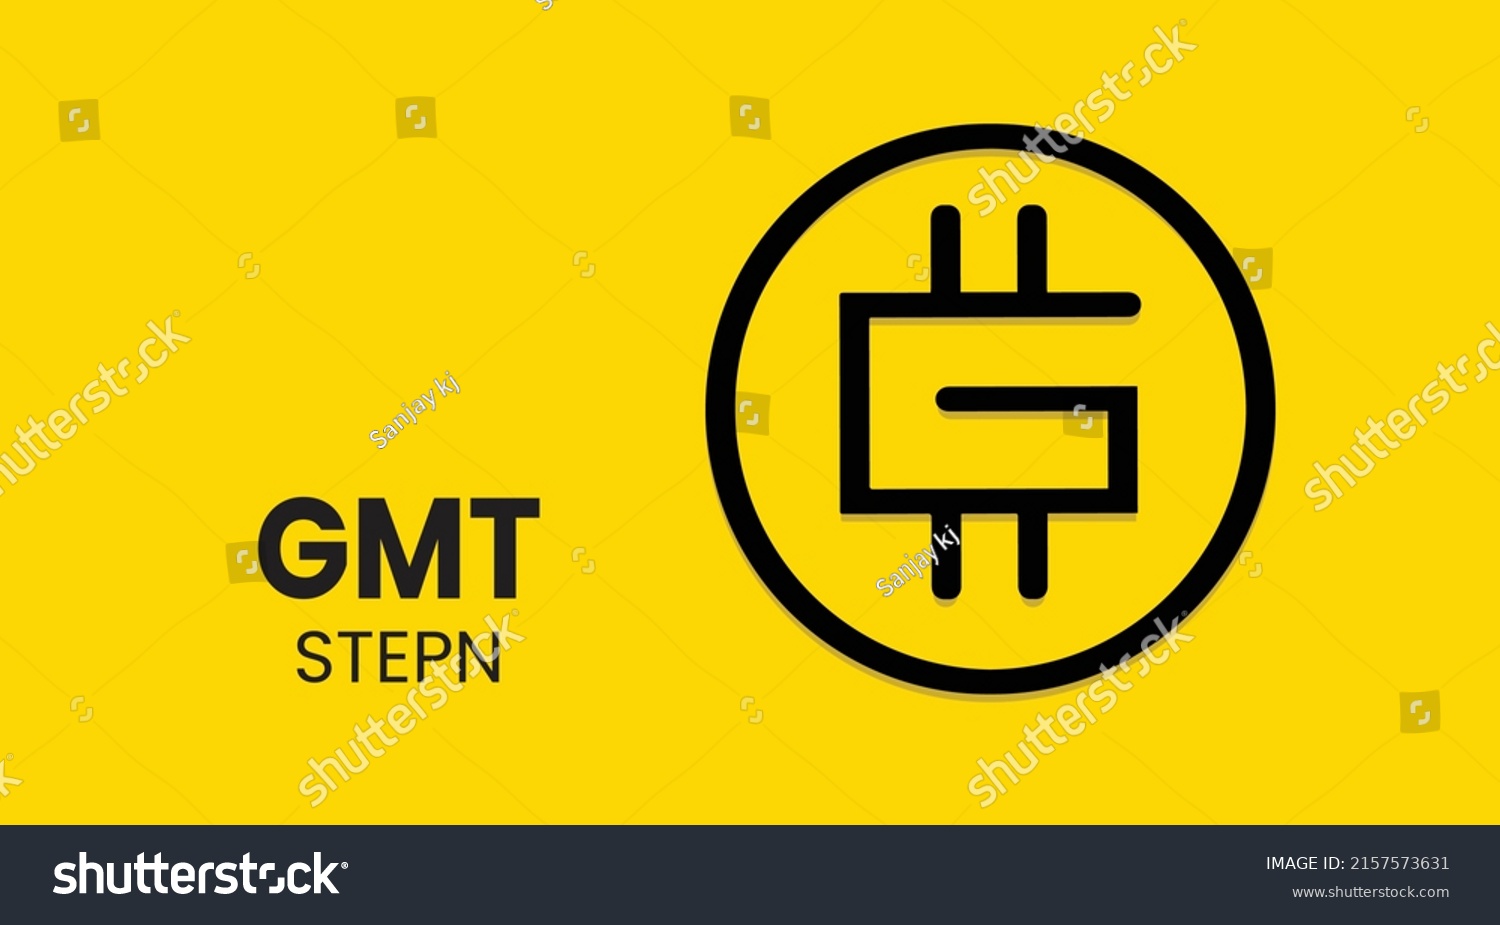 SVG of Stepn GMT coin cryptocurrency 3d logo isolated on yellow background with copy space. vector illustration of Stepn banner design concept. svg